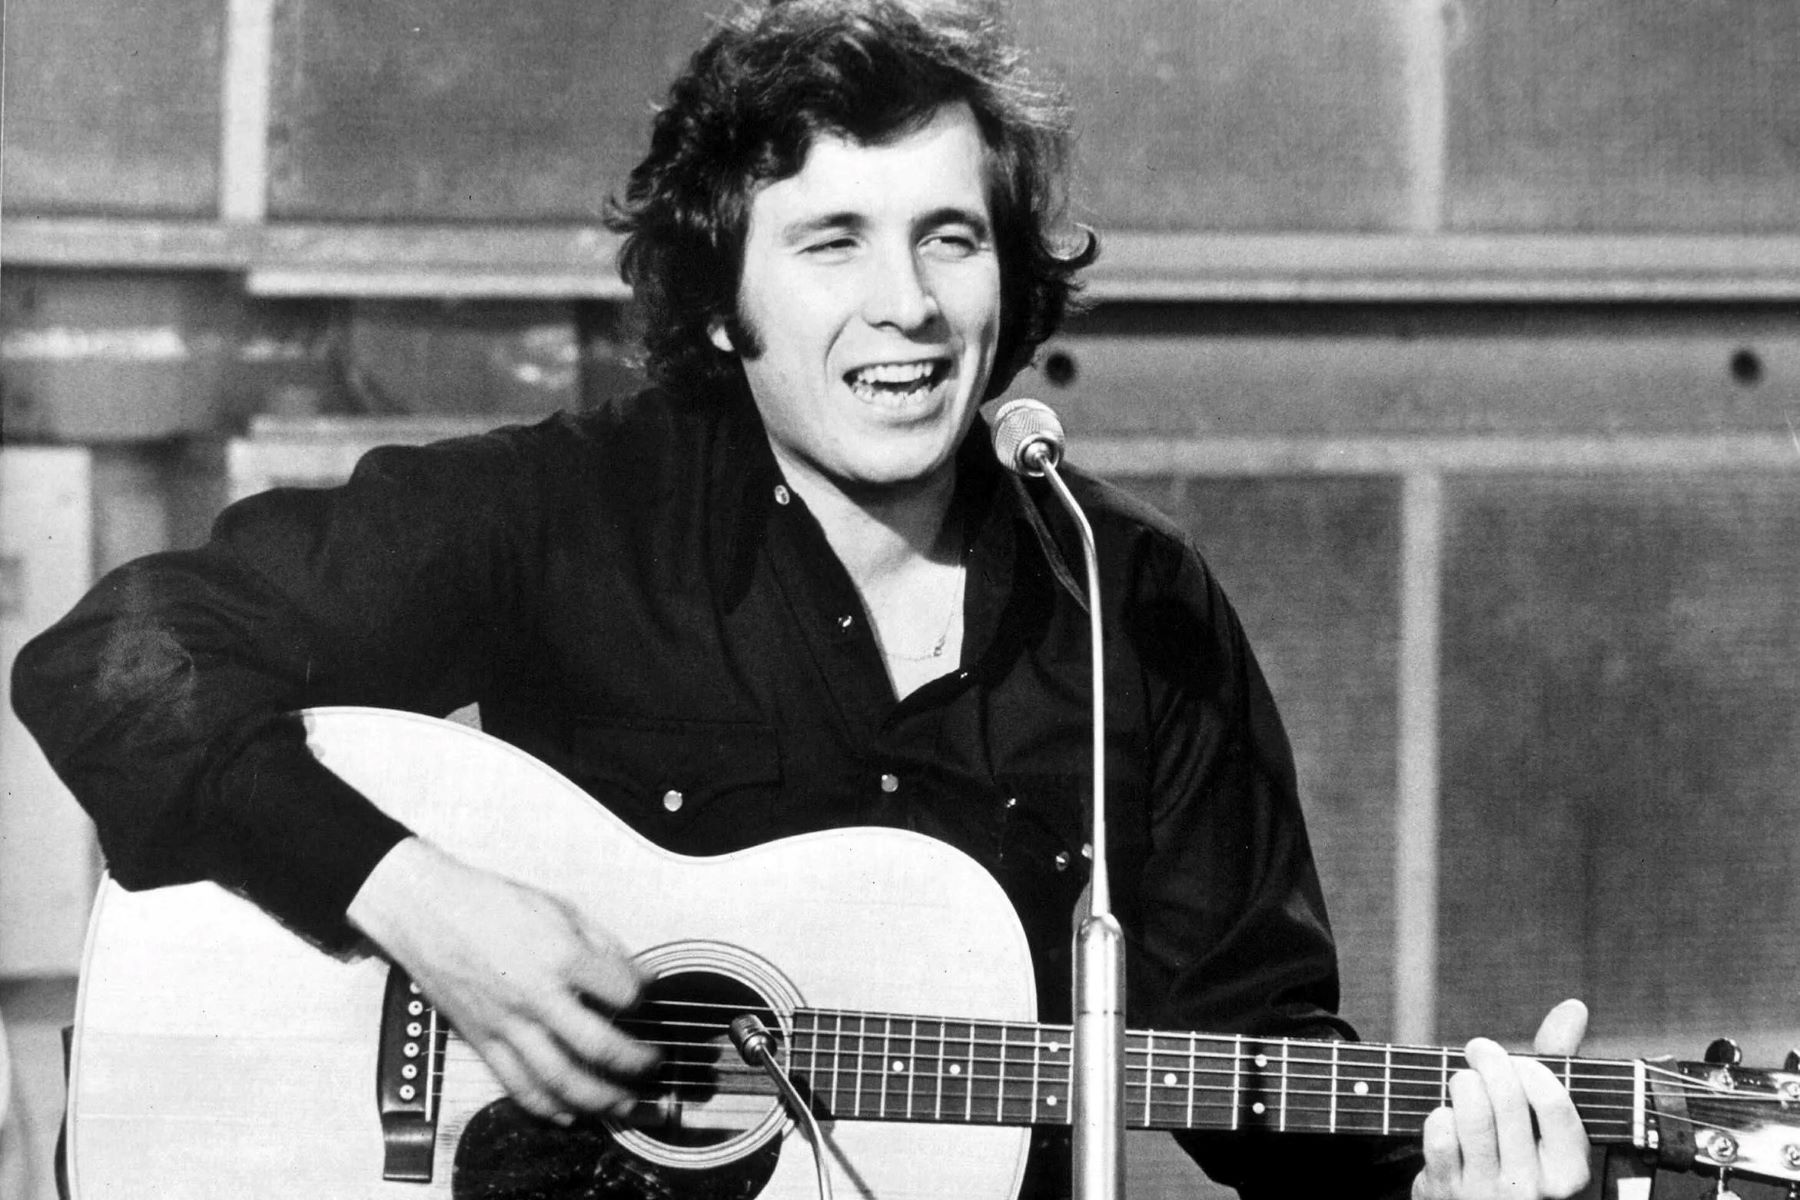 The Surprising Connection Between Don Mclean’s “American Pie” And The Movie “American Pie”